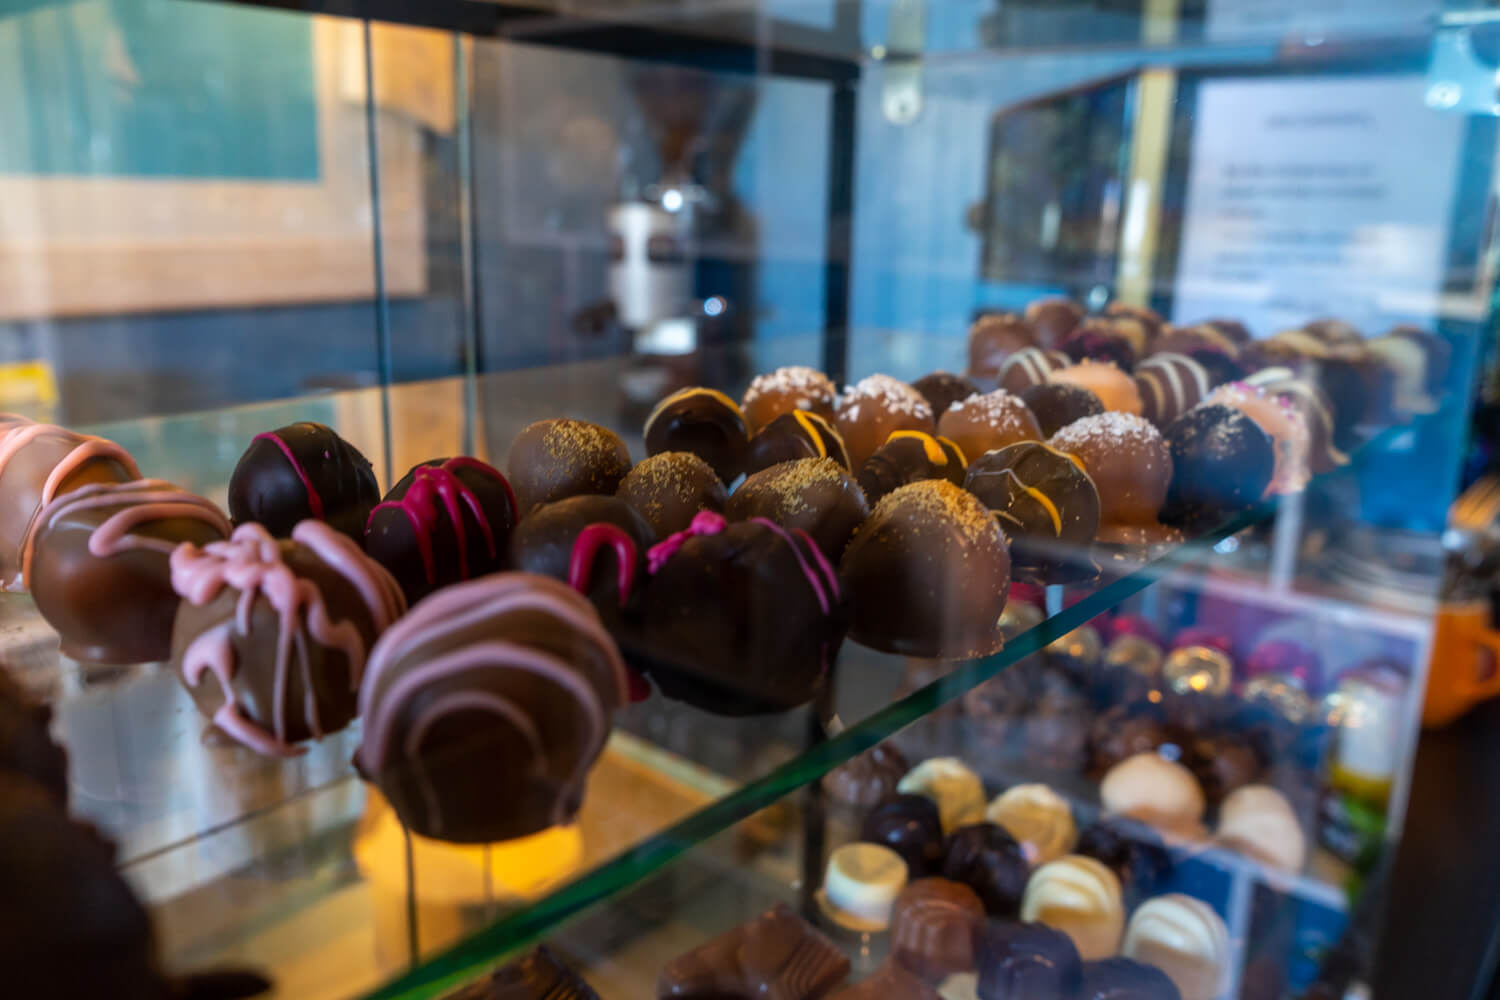 The wide selection of handmade chocolate at Caragh Chocolates.